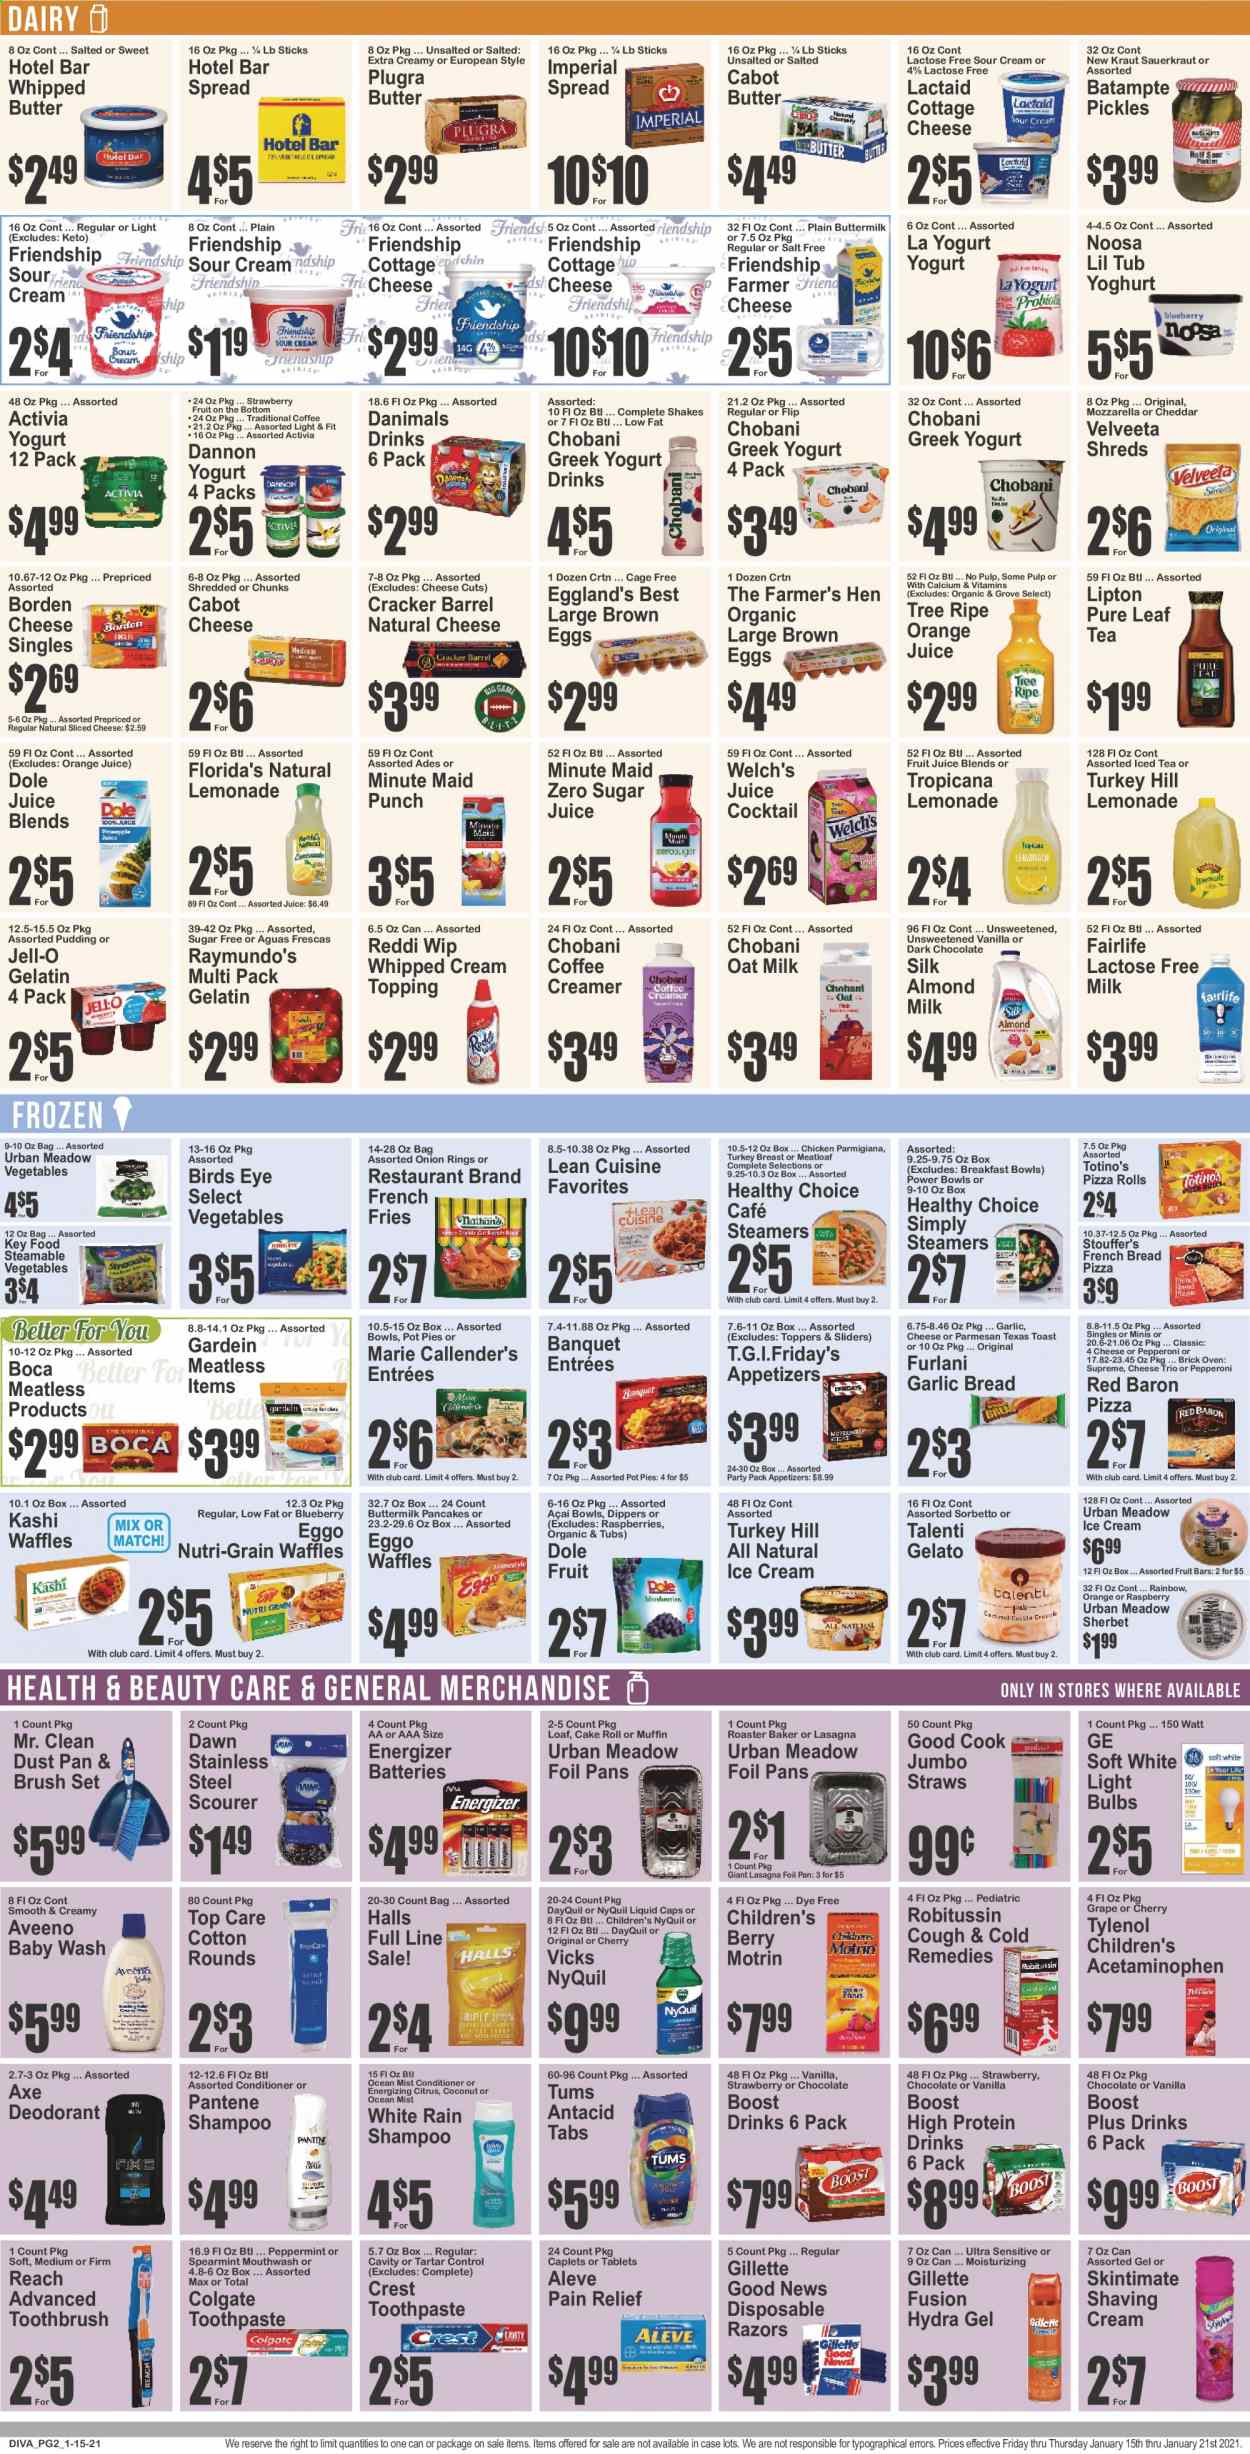 thumbnail - Key Food Flyer - 01/15/2021 - 01/21/2021 - Sales products - raspberries, Dole, bread, pizza rolls, toast bread, pot pie, cake, pancakes, muffin, waffles, coconut, pizza, onion rings, breakfast bowl, meatloaf, Bird's Eye, Lean Cuisine, Welch's, Healthy Choice, cottage cheese, farmer cheese, Lactaid, mozzarella, sliced cheese, parmesan, greek yoghurt, pudding, yoghurt, Activia, Chobani, Dannon, Danimals, almond milk, buttermilk, protein drink, lactose free milk, yoghurt drink, shake, oat milk, eggs, cage free eggs, whipped butter, sour cream, whipped cream, creamer, coffee and tea creamer, ice cream, sherbet, Talenti Gelato, gelato, pickles, Stouffer's, potato fries, french fries, Red Baron, Halls, chocolate, crackers, Florida's Natural, oats, salt, topping, Jell-O, sauerkraut, lemonade, orange juice, juice, fruit juice, Lipton, Boost, Pure Leaf, punch, turkey breast, Aveeno, scourer, shampoo, Colgate, toothbrush, toothpaste, mouthwash, brush set, Crest, conditioner, Pantene, anti-perspirant, deodorant, Gillette, disposable razor, Vicks, straw, battery, bulb, Energizer, light bulb, gelatin, Aleve, calcium, DayQuil, Robitussin, Tylenol, pain relief, NyQuil, Antacid, Motrin. Page 3.